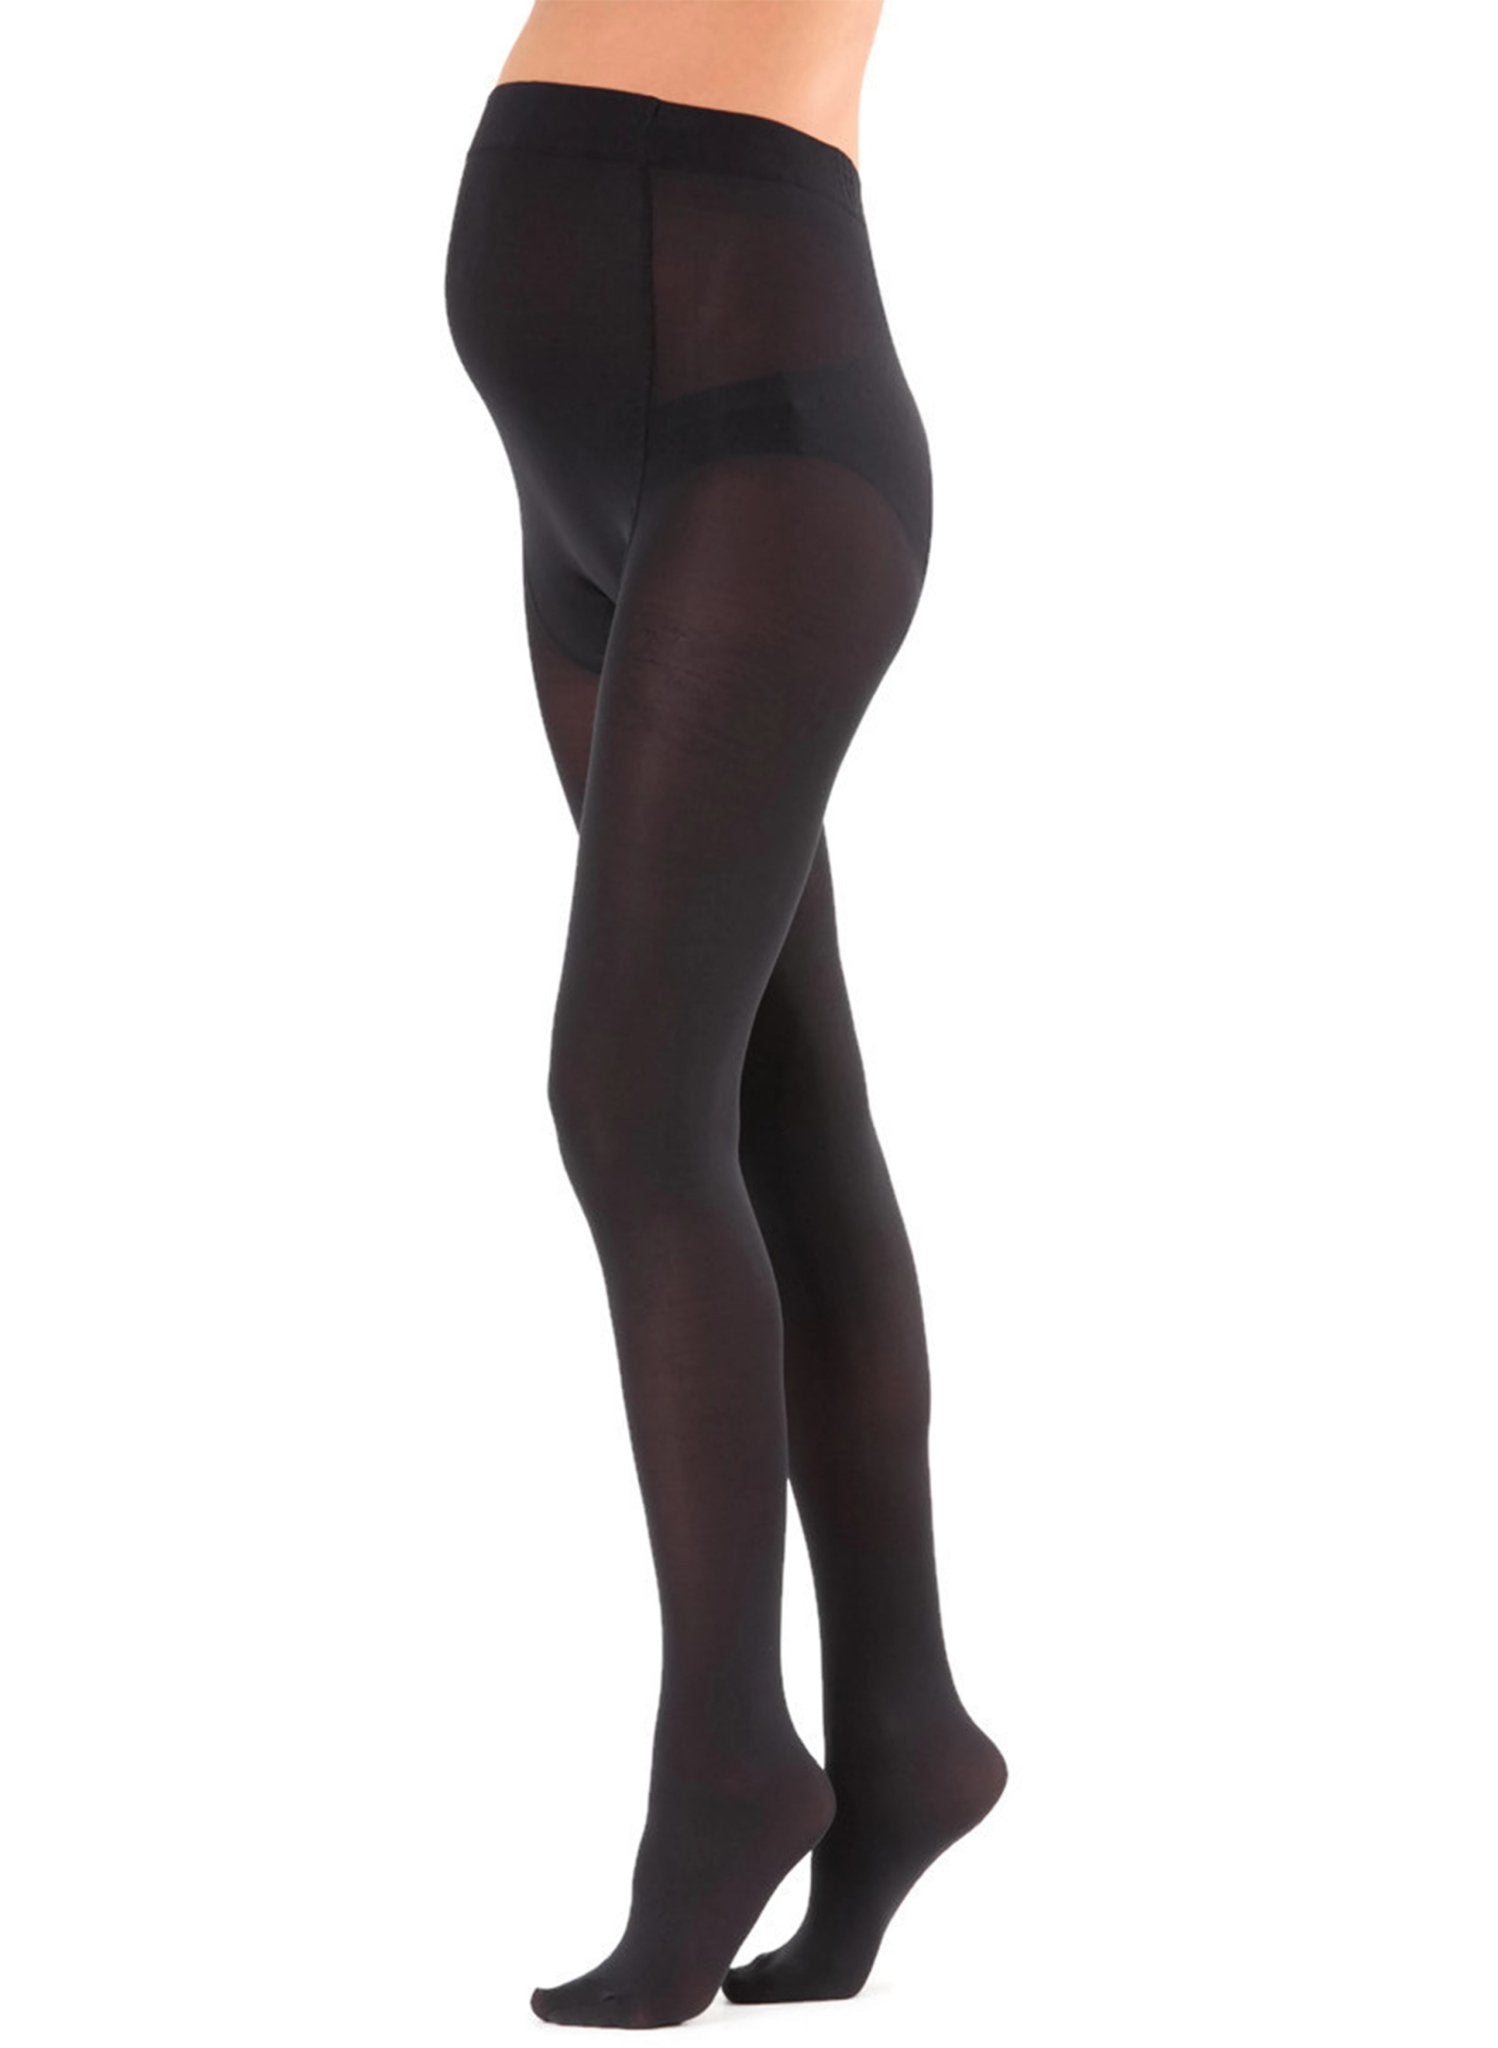 60Den Maternity Tights - Black - Mums and Bumps